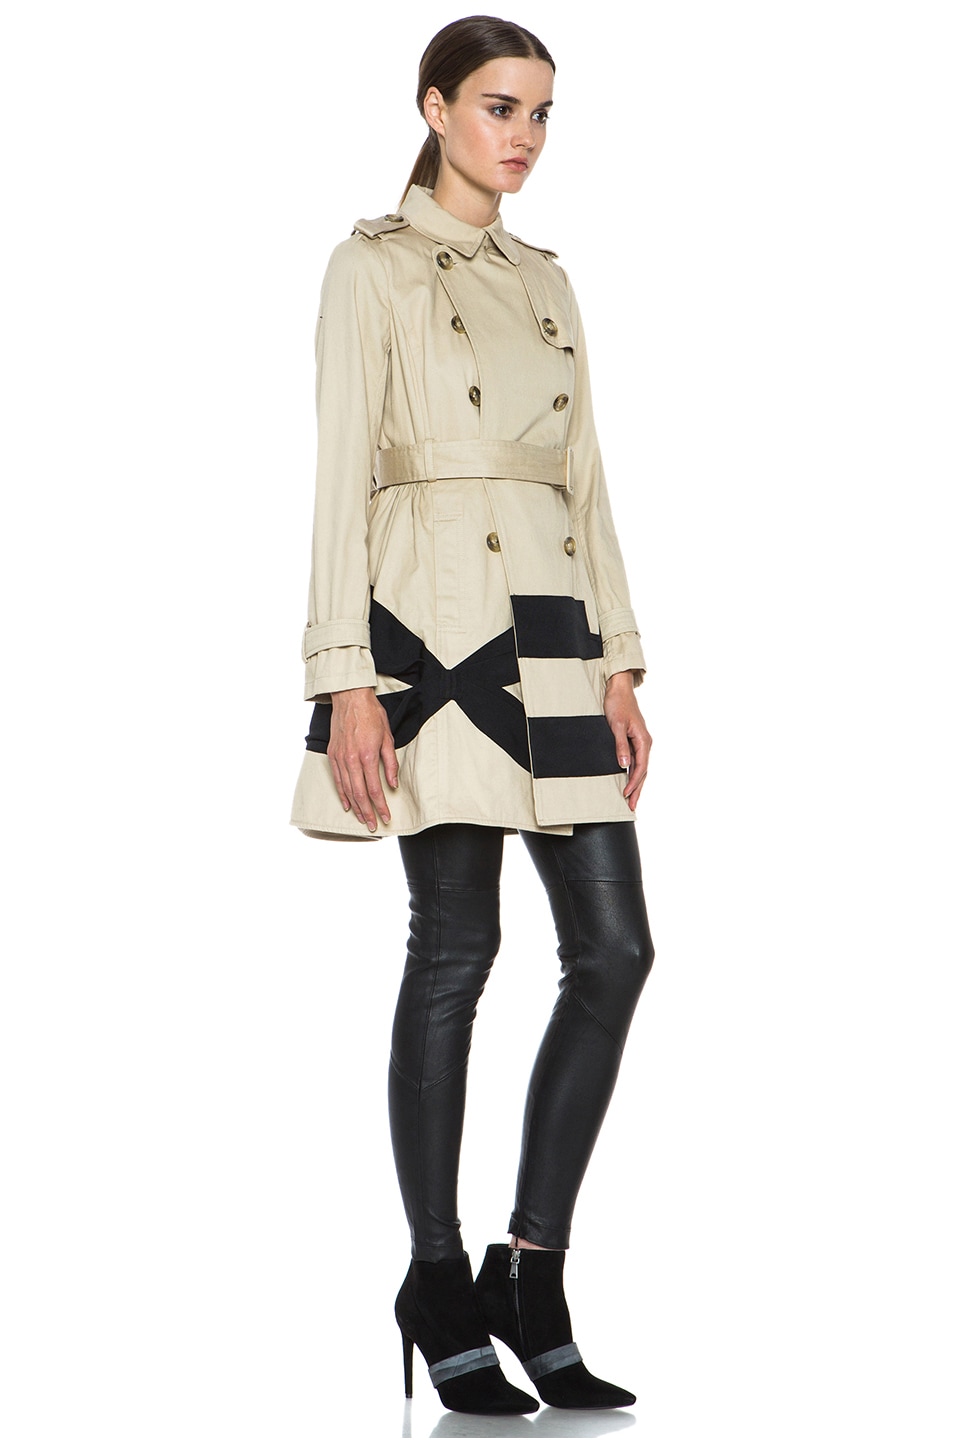 Red Valentino A-Line Cotton Trench Coat in Khaki | FWRD